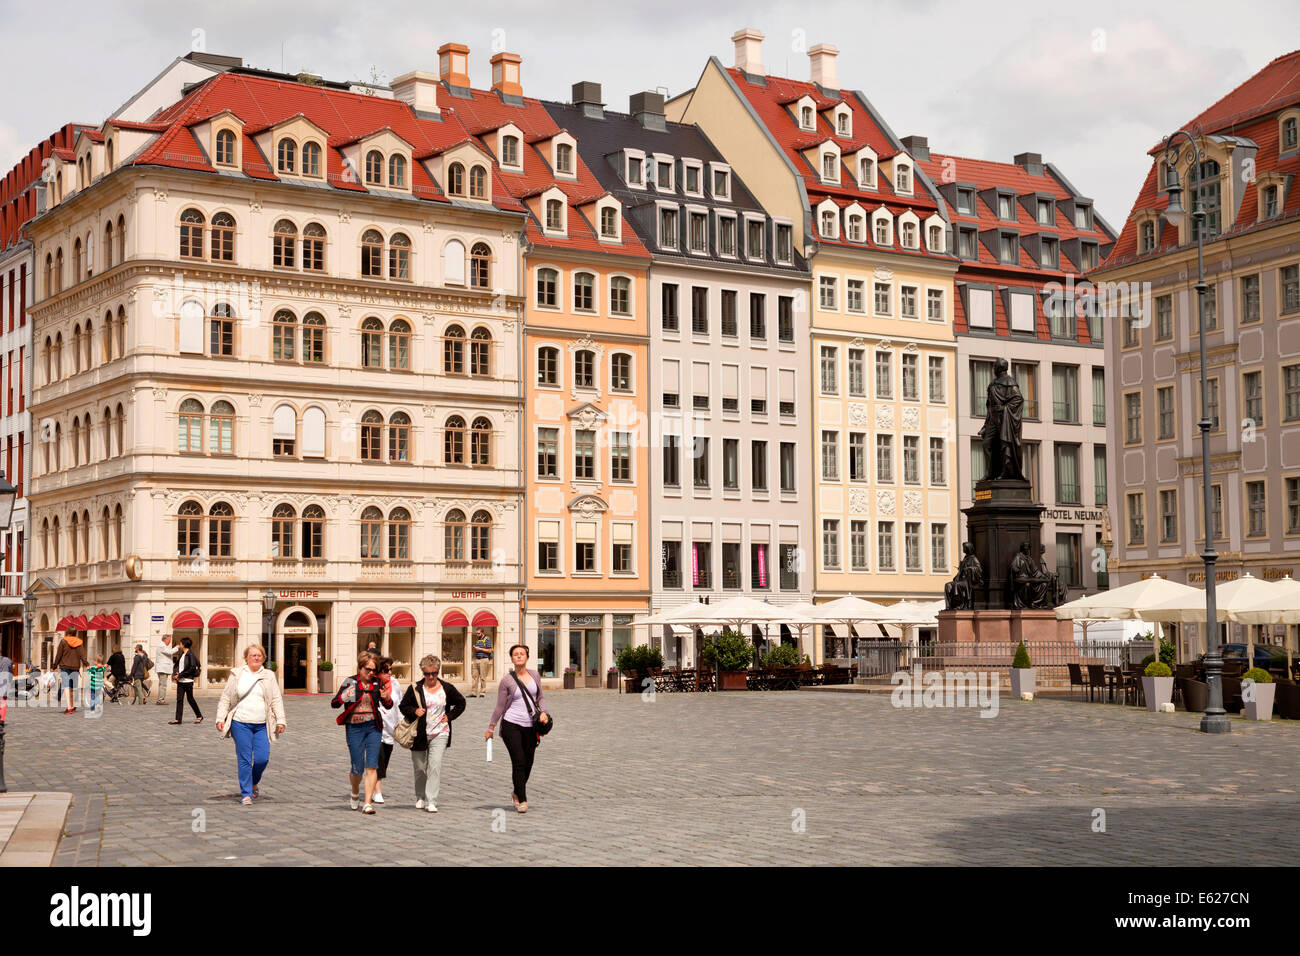 renovated facades on  Neumarkt new market square  in Dresden, Saxony, Germany, Europe Stock Photo